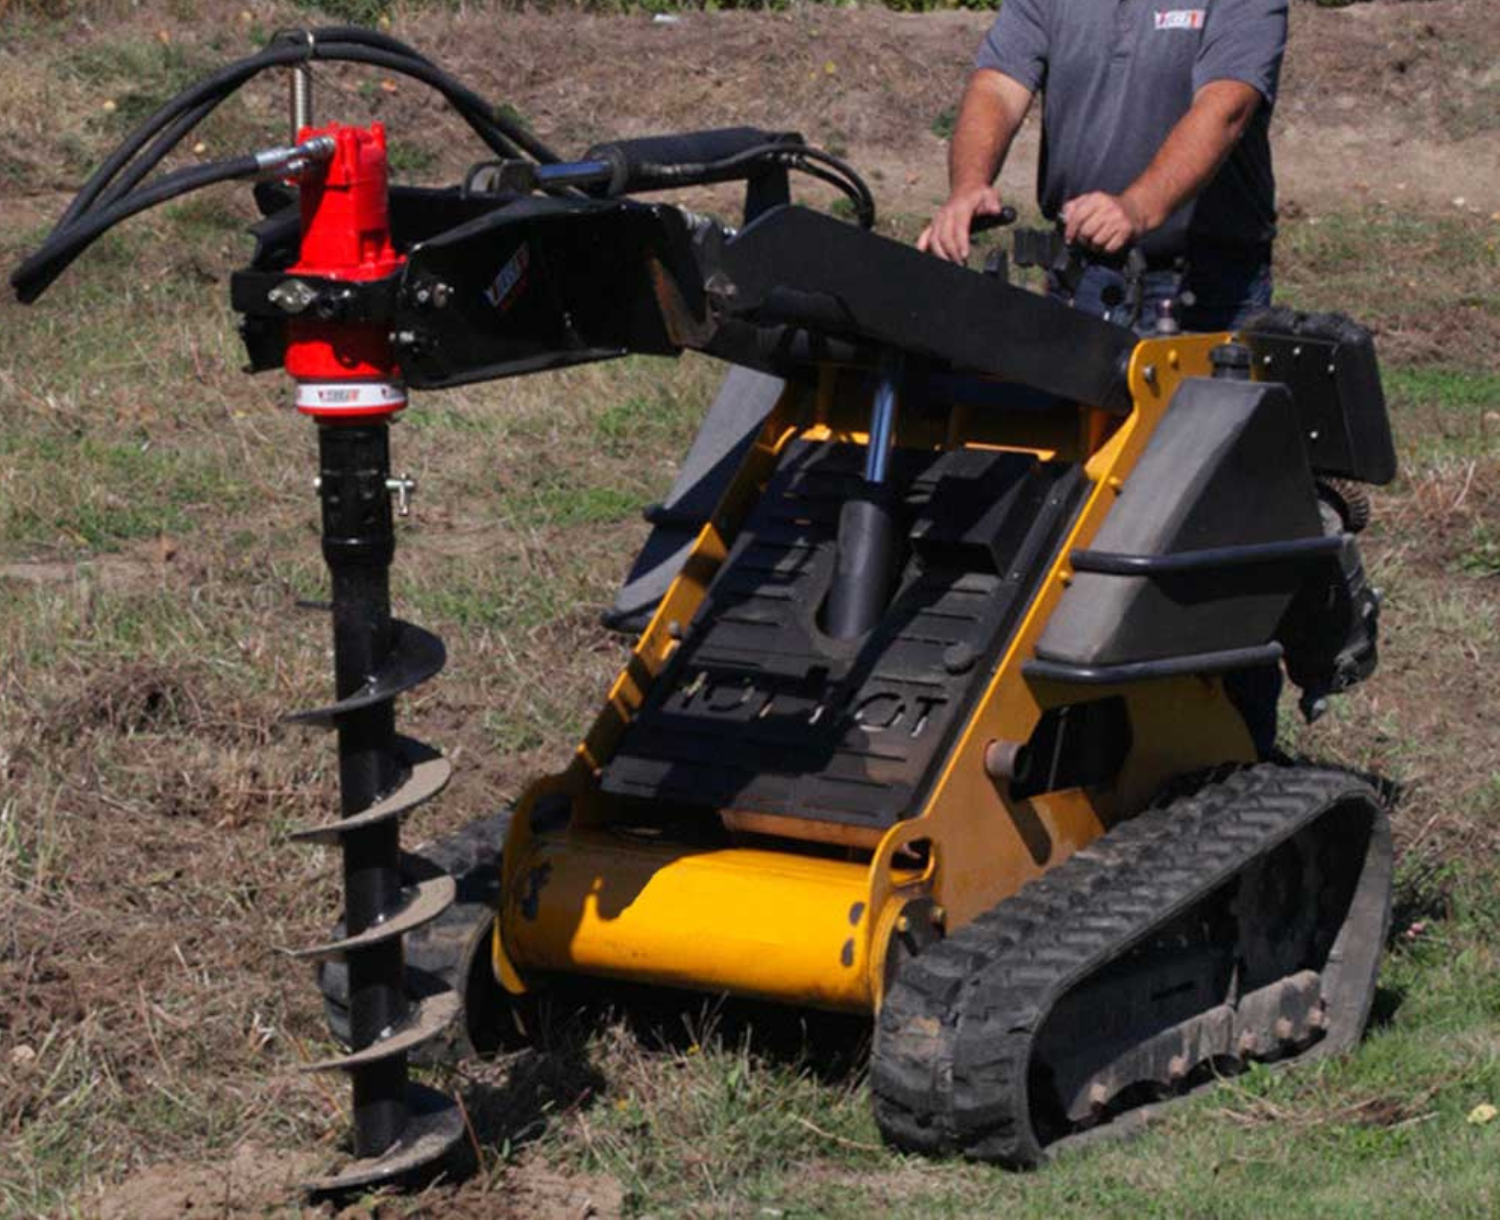 right angled view of a mini skid steer on grass with an eterra mini skid steer auger drive attachment on the front drilling into the ground